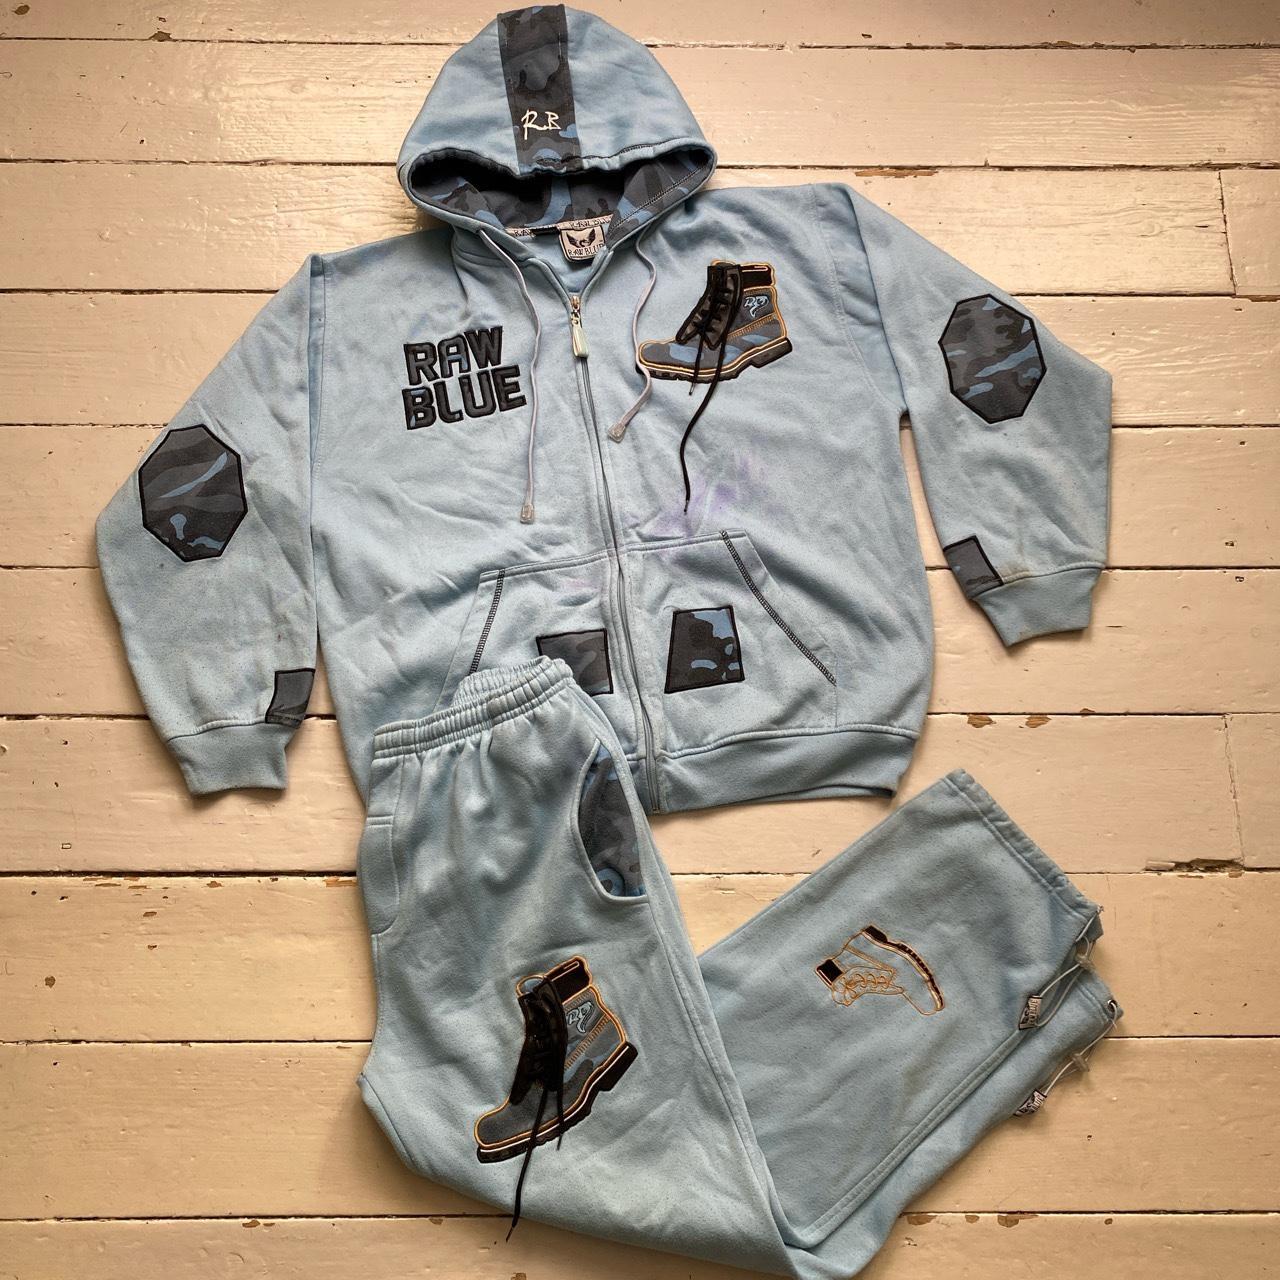 Raw Blue Vintage Light Baby Blue Timberland Lace Up Boot Full Tracksuit